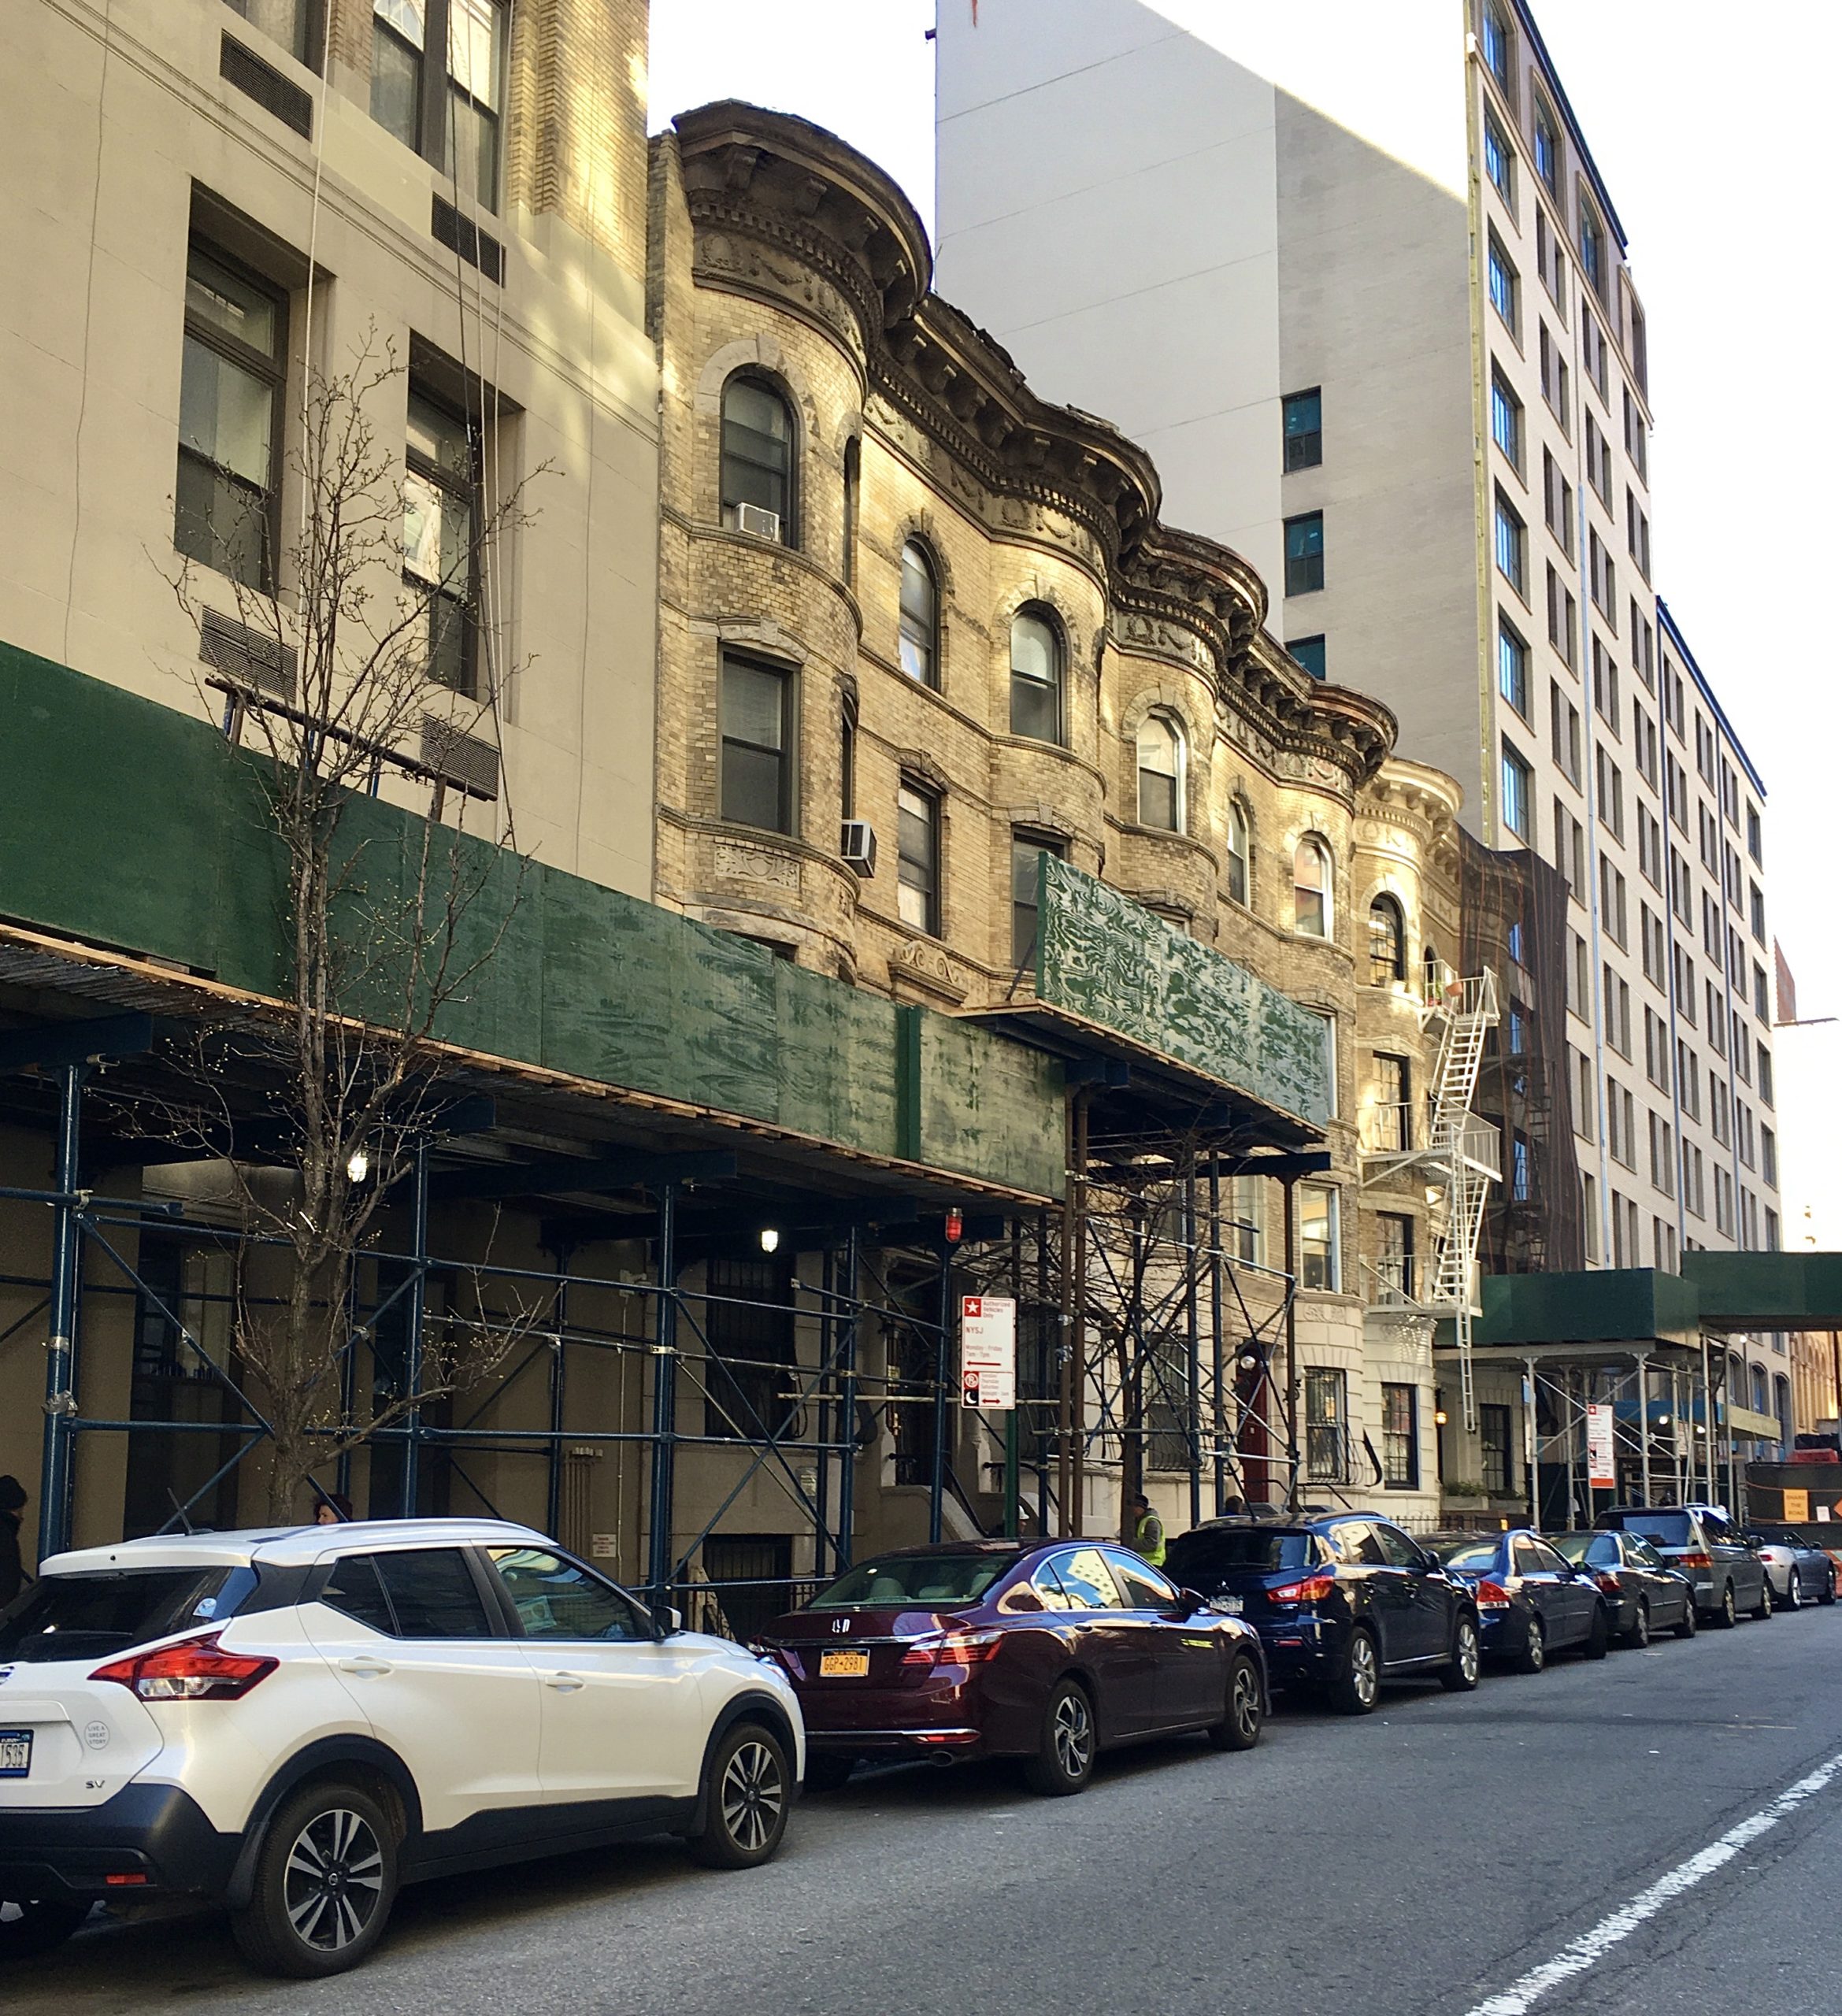 The townhouse at left is 88 Schermerhorn St., where a hotel is planned. Photo: Lore Croghan/Brooklyn Eagle